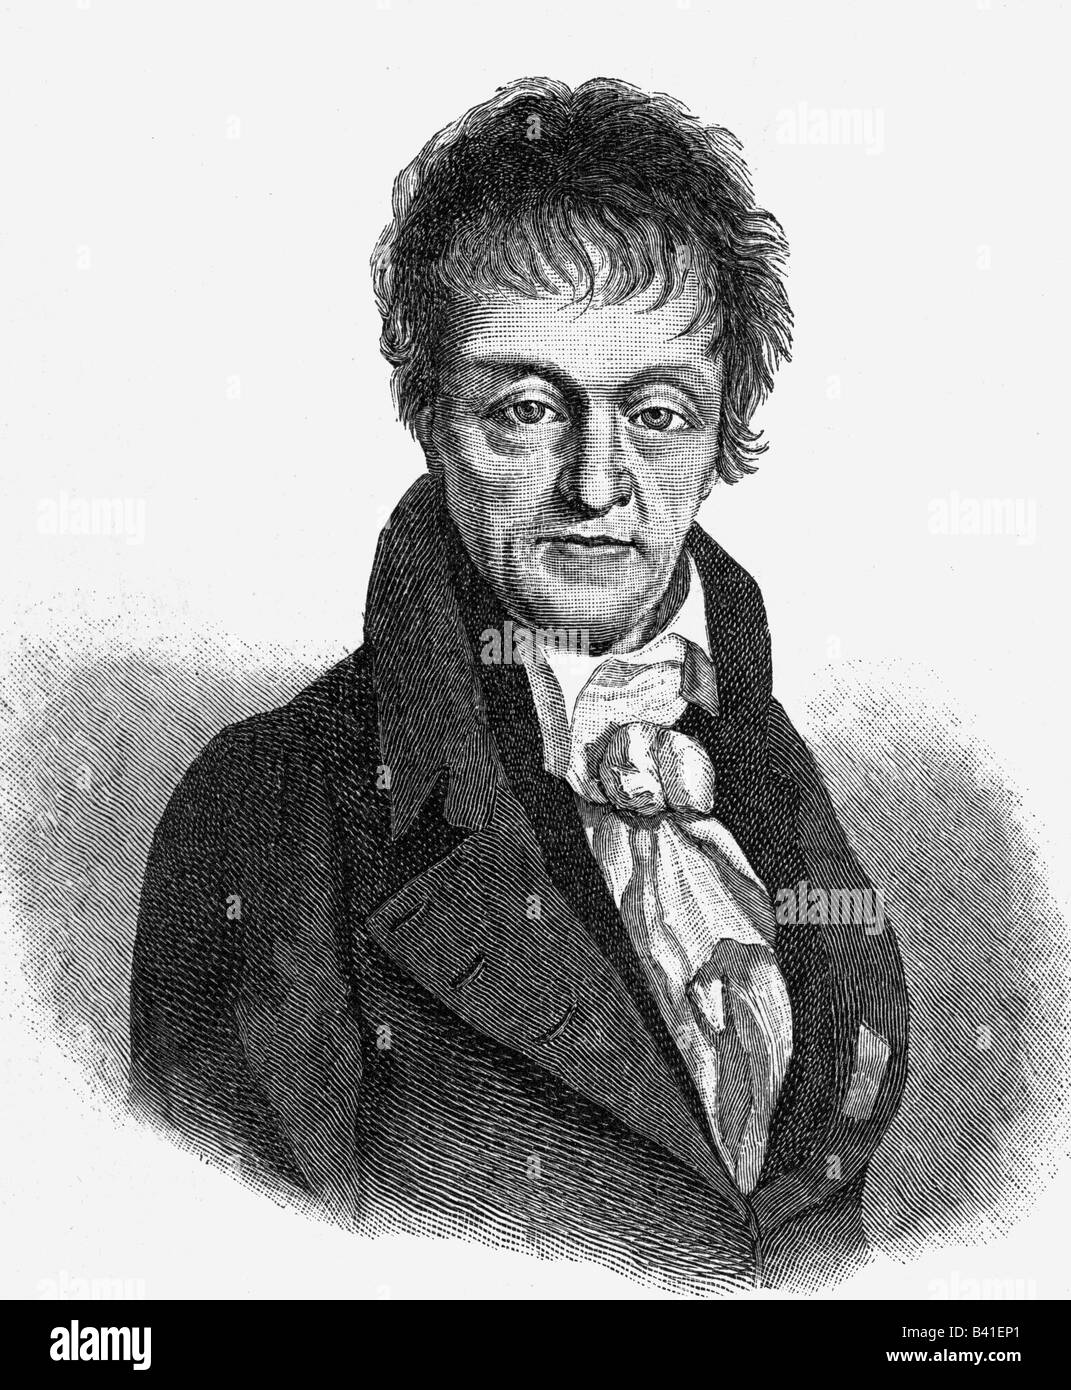 Carnot, Lazare Nicolas, 13.5.1753 - 3.8.1823, French politician, minister of war 1793 - 1795 and 1800 - 1801, portrait, steel engraving, 19th century, , Stock Photo